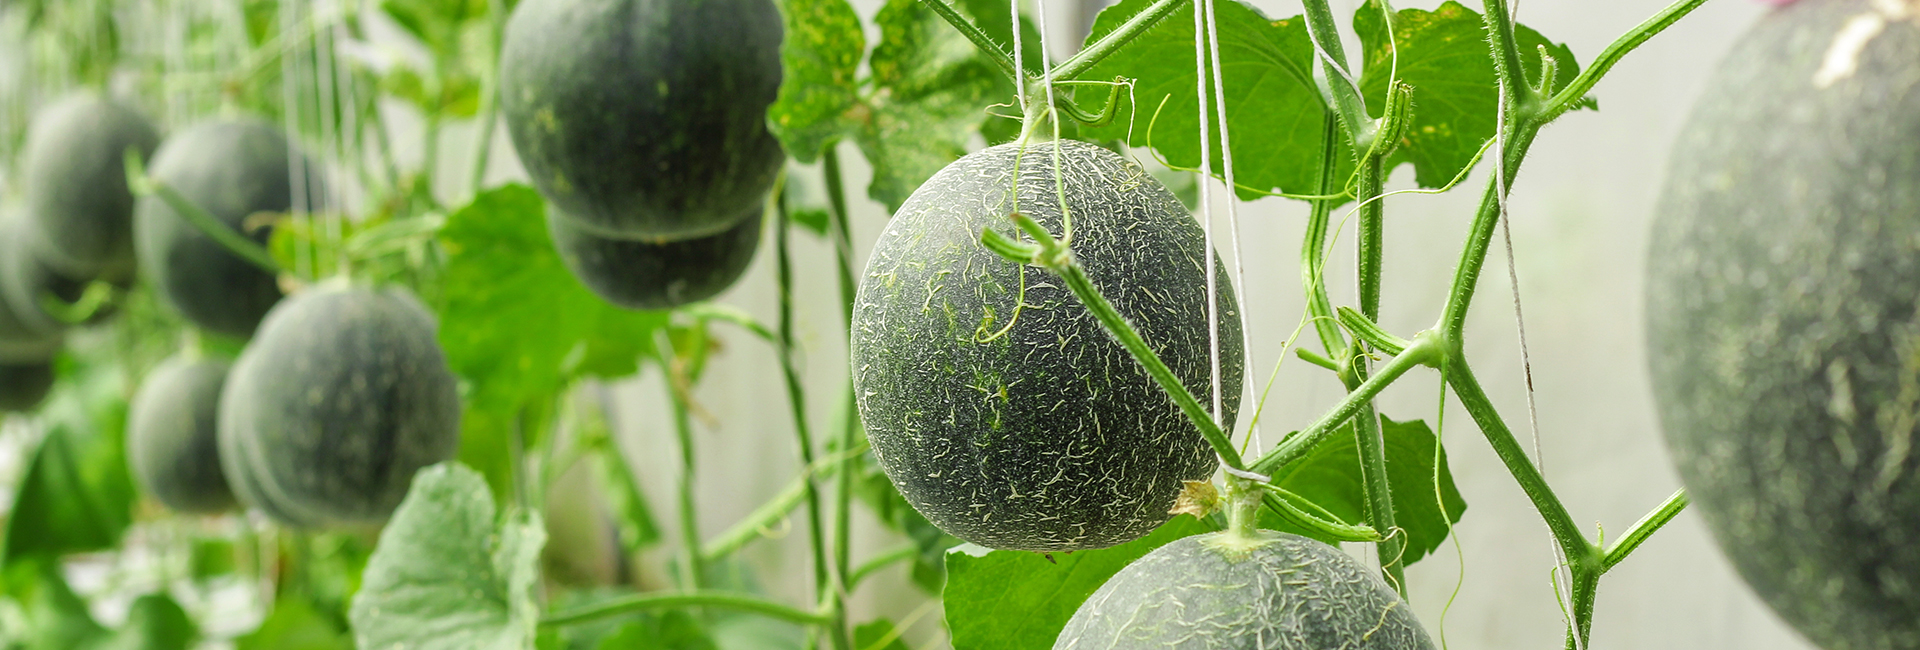 Process of Growing Melons in Containers